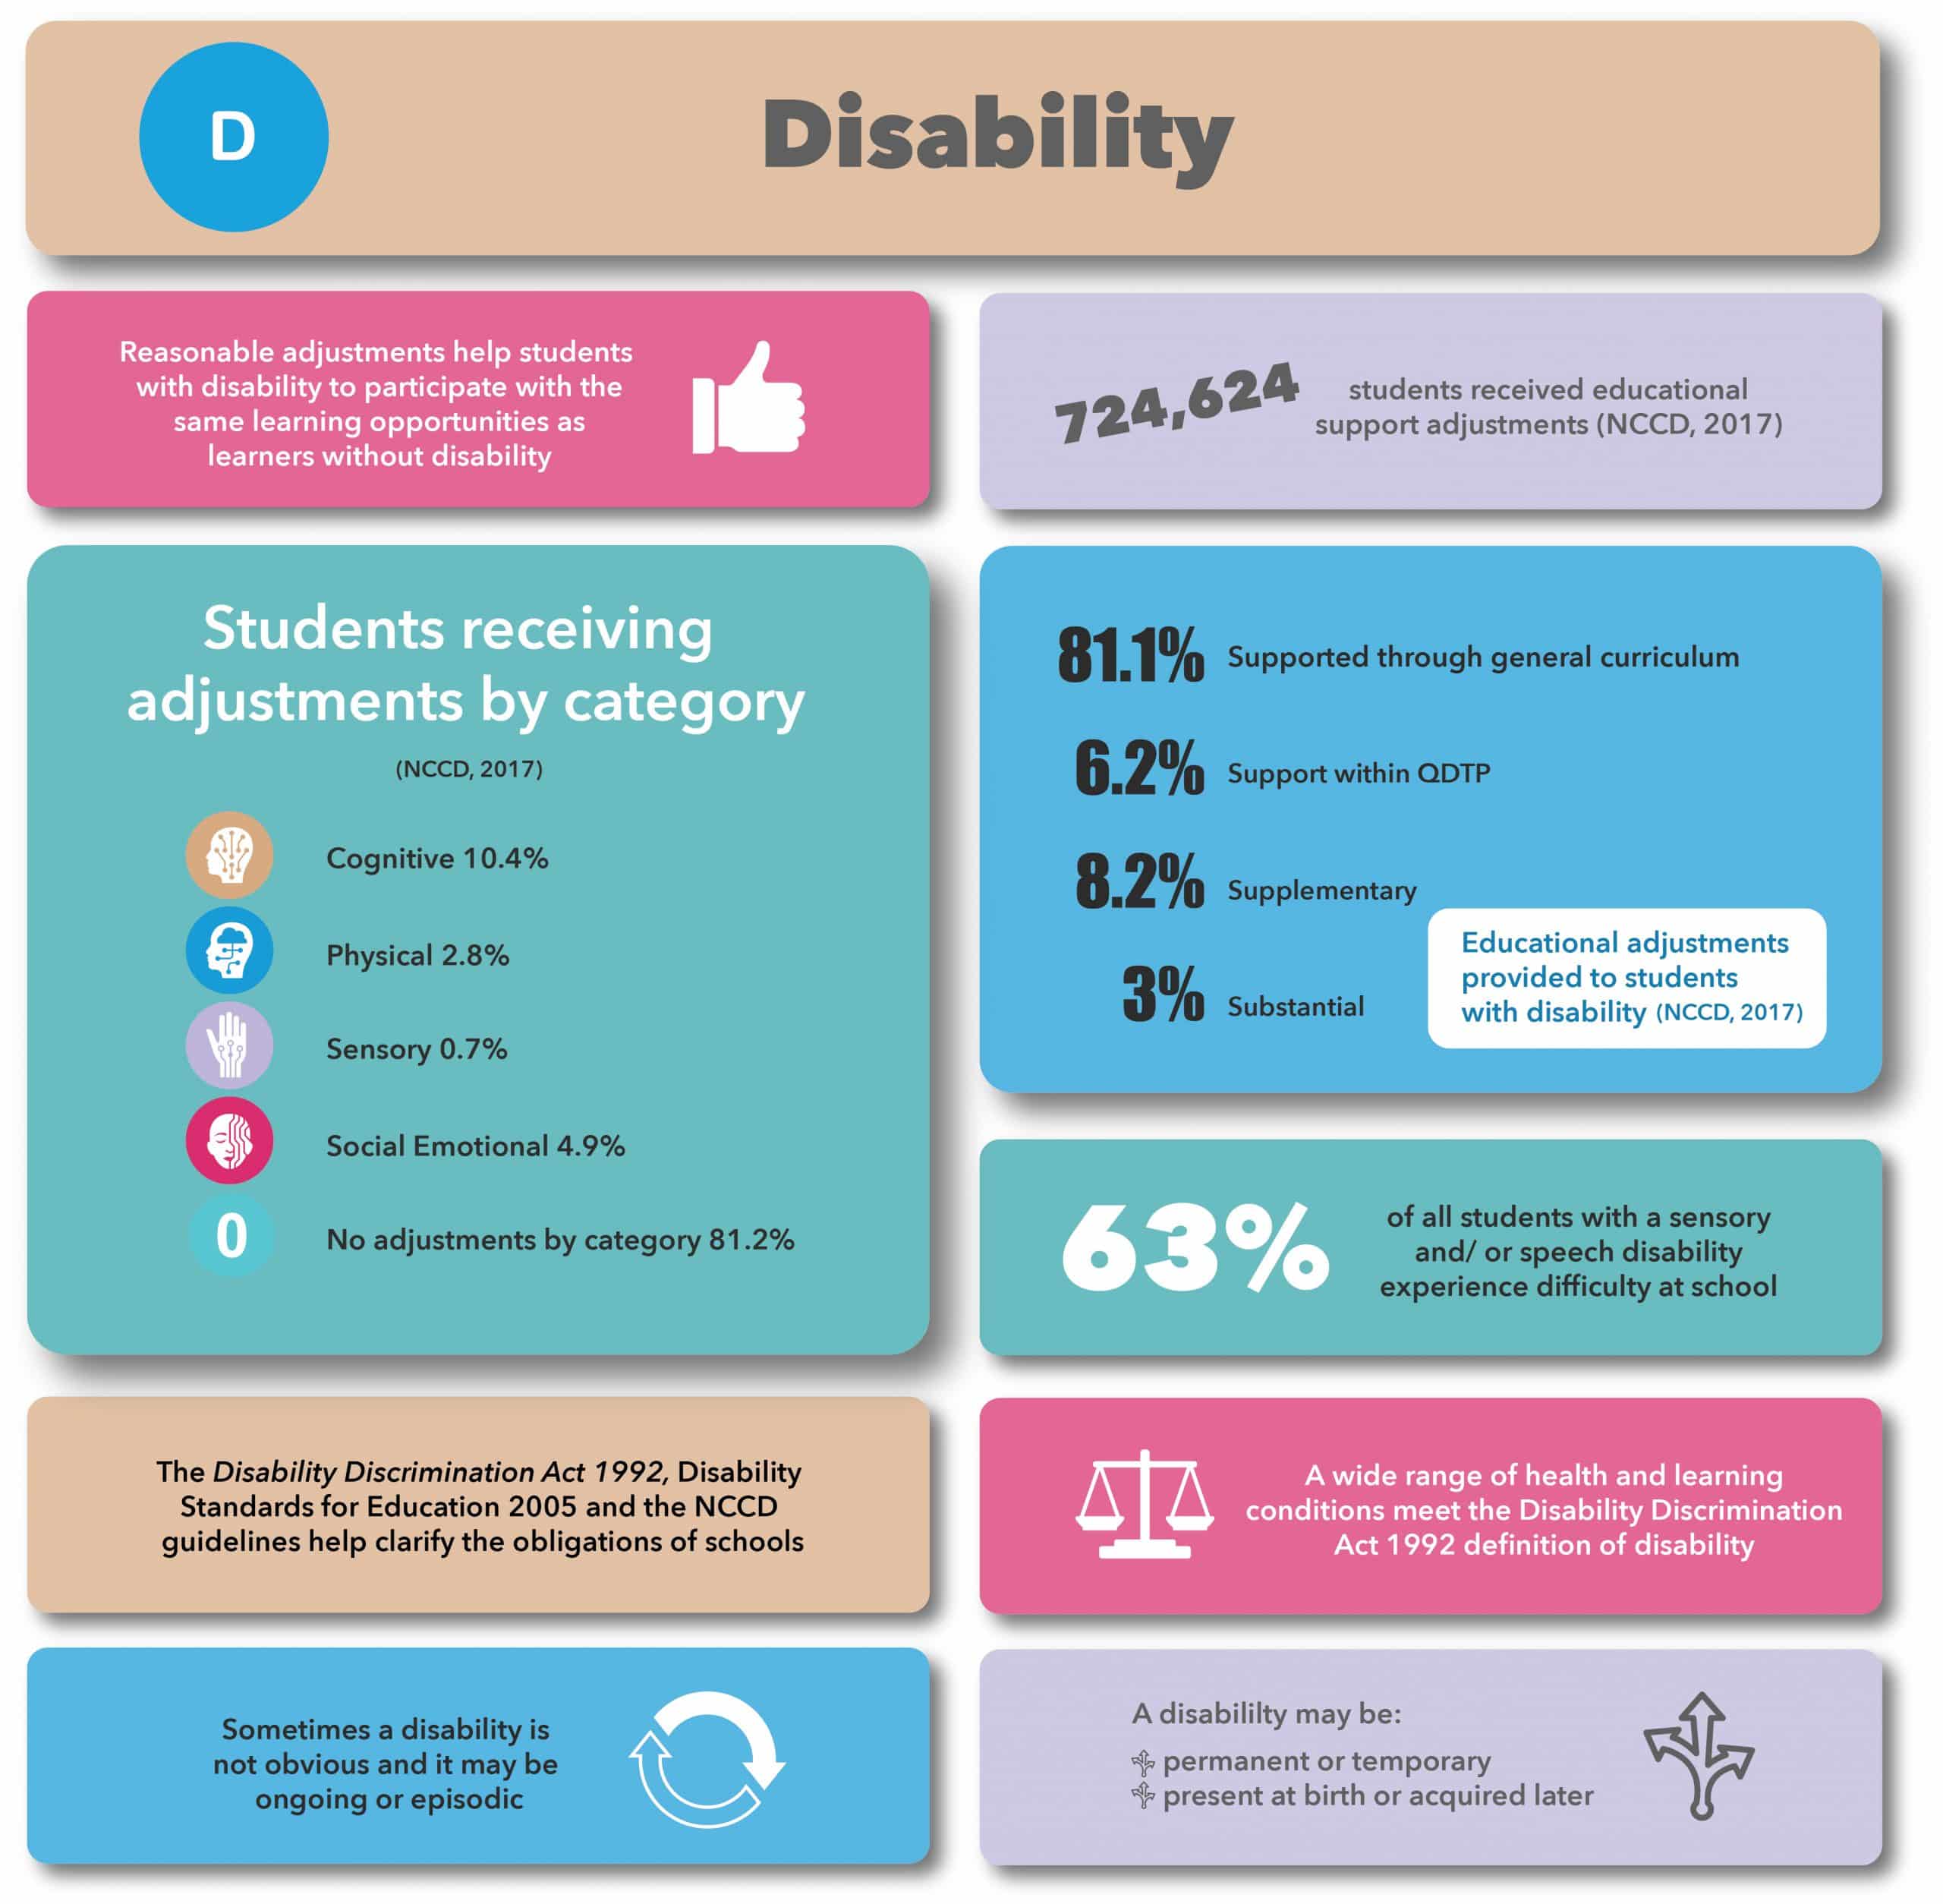 Meeting the needs of students with a disability